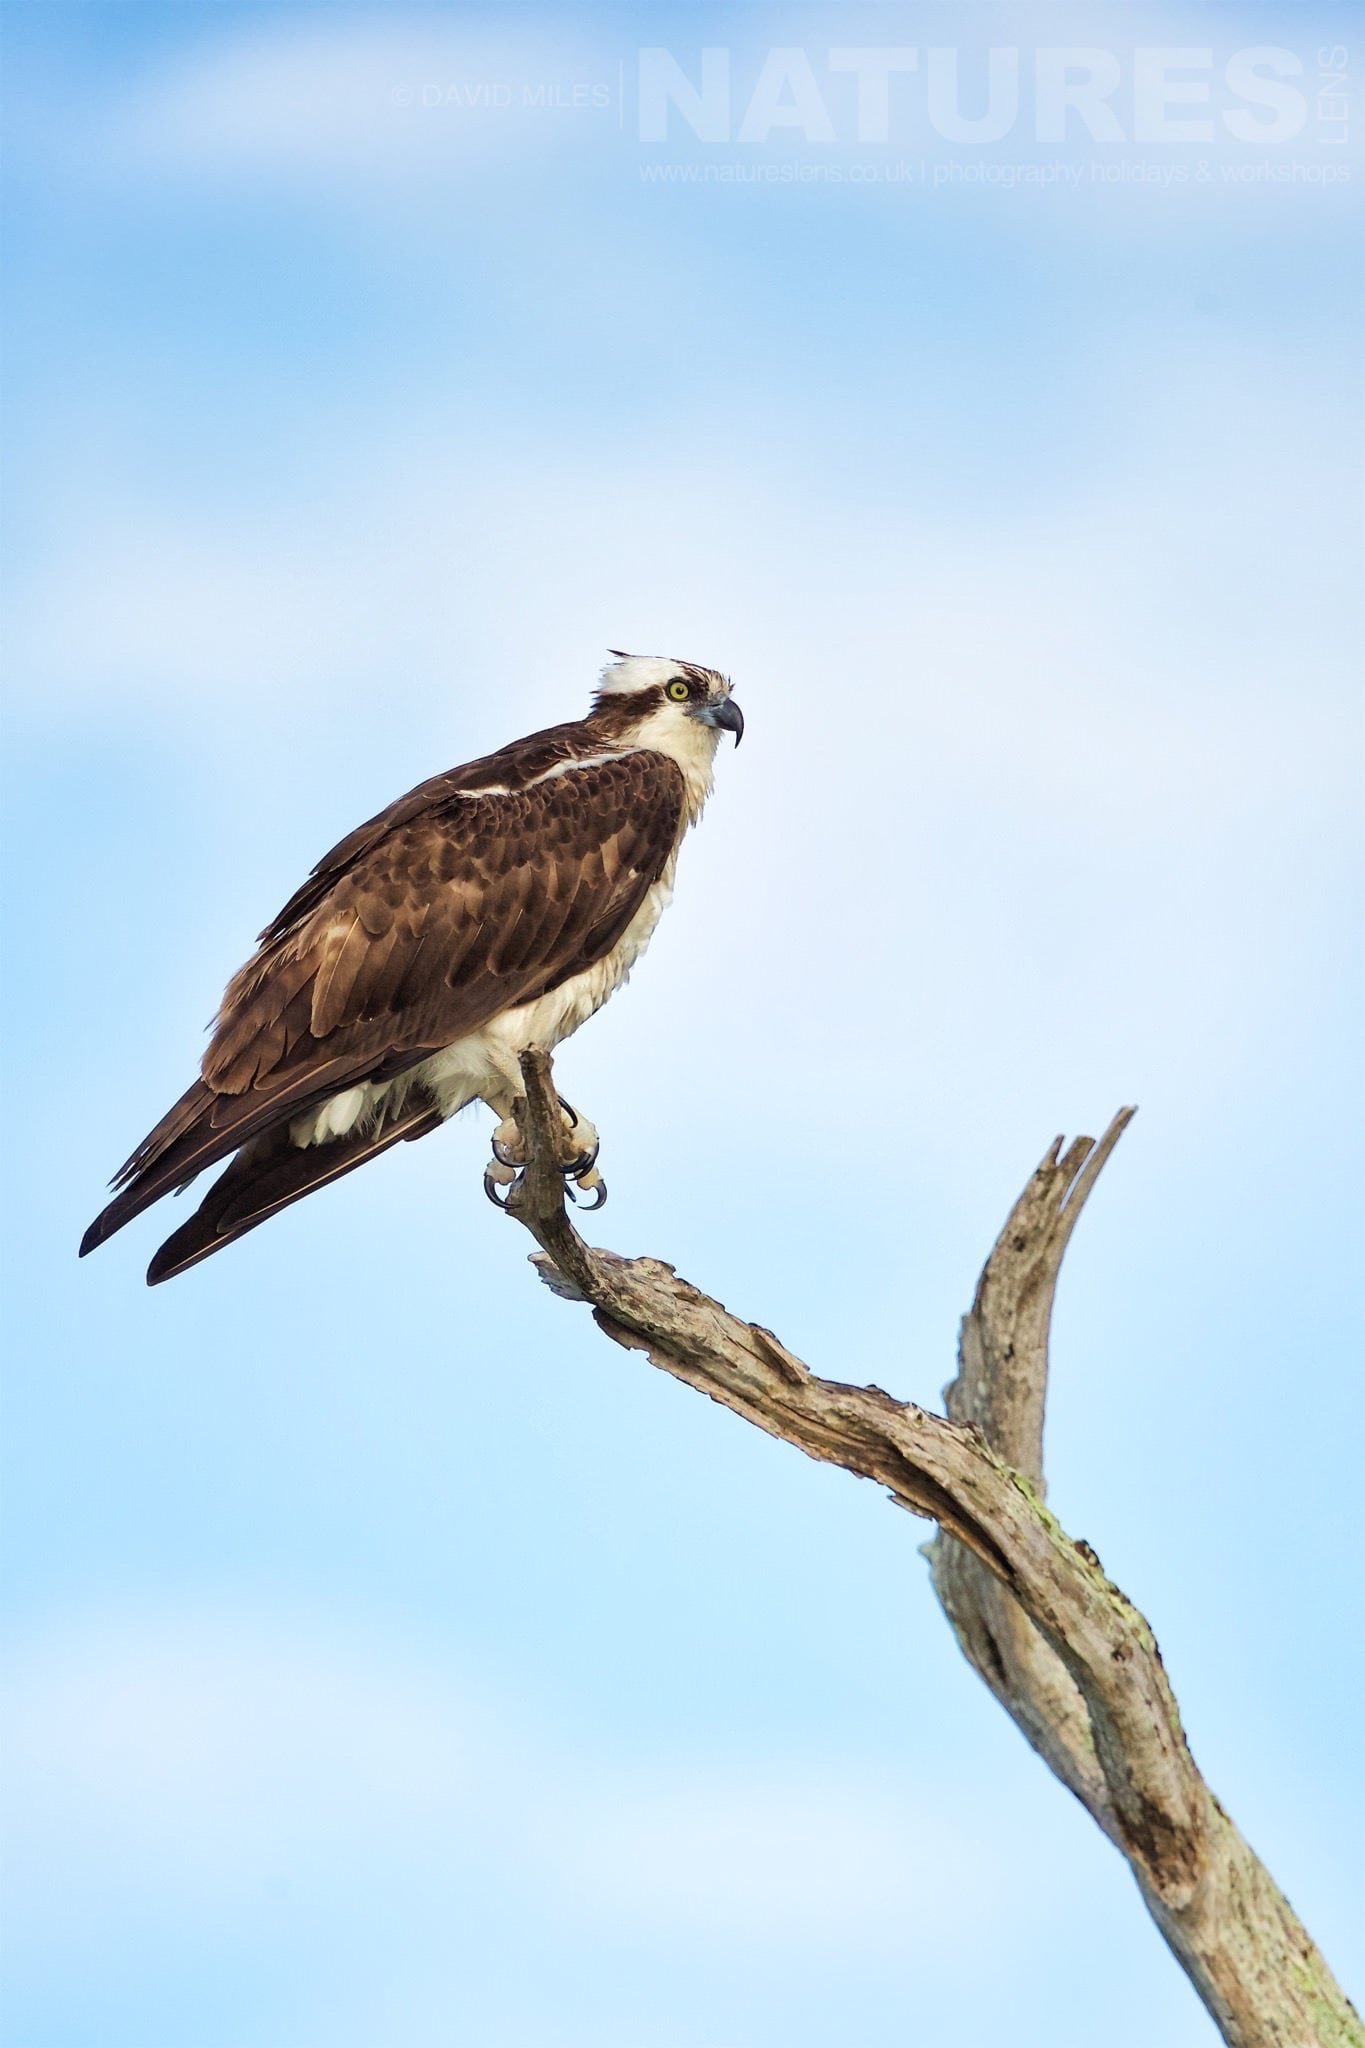 An Osprey Perches At The Top Of One Of The Cypress Trees Photographed On The Naturelens Ospreys Of Blue Cypress Lake Photography Holiday